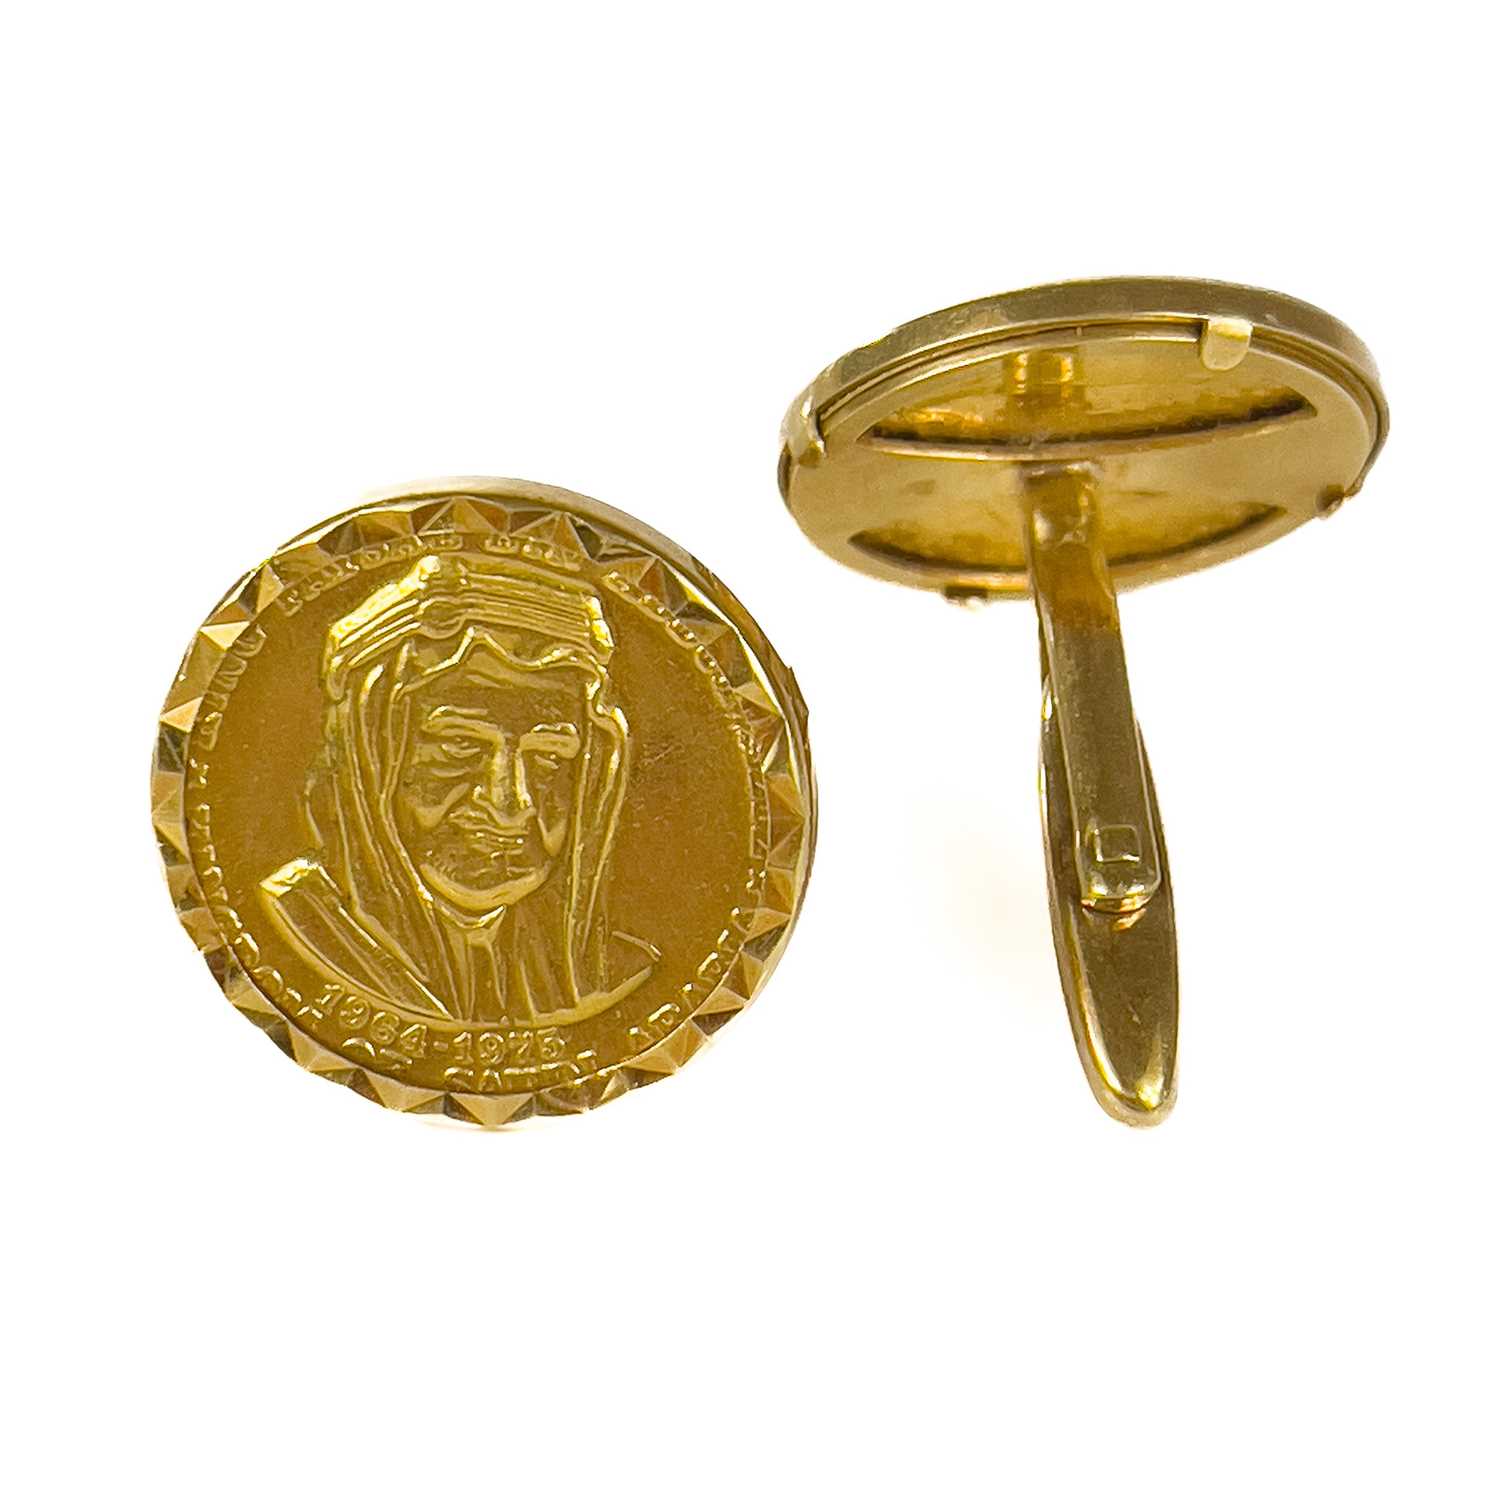 A pair of 22ct gold Saudi Arabia King Faisal commemorative medals set into 18ct cuff links. - Image 6 of 7